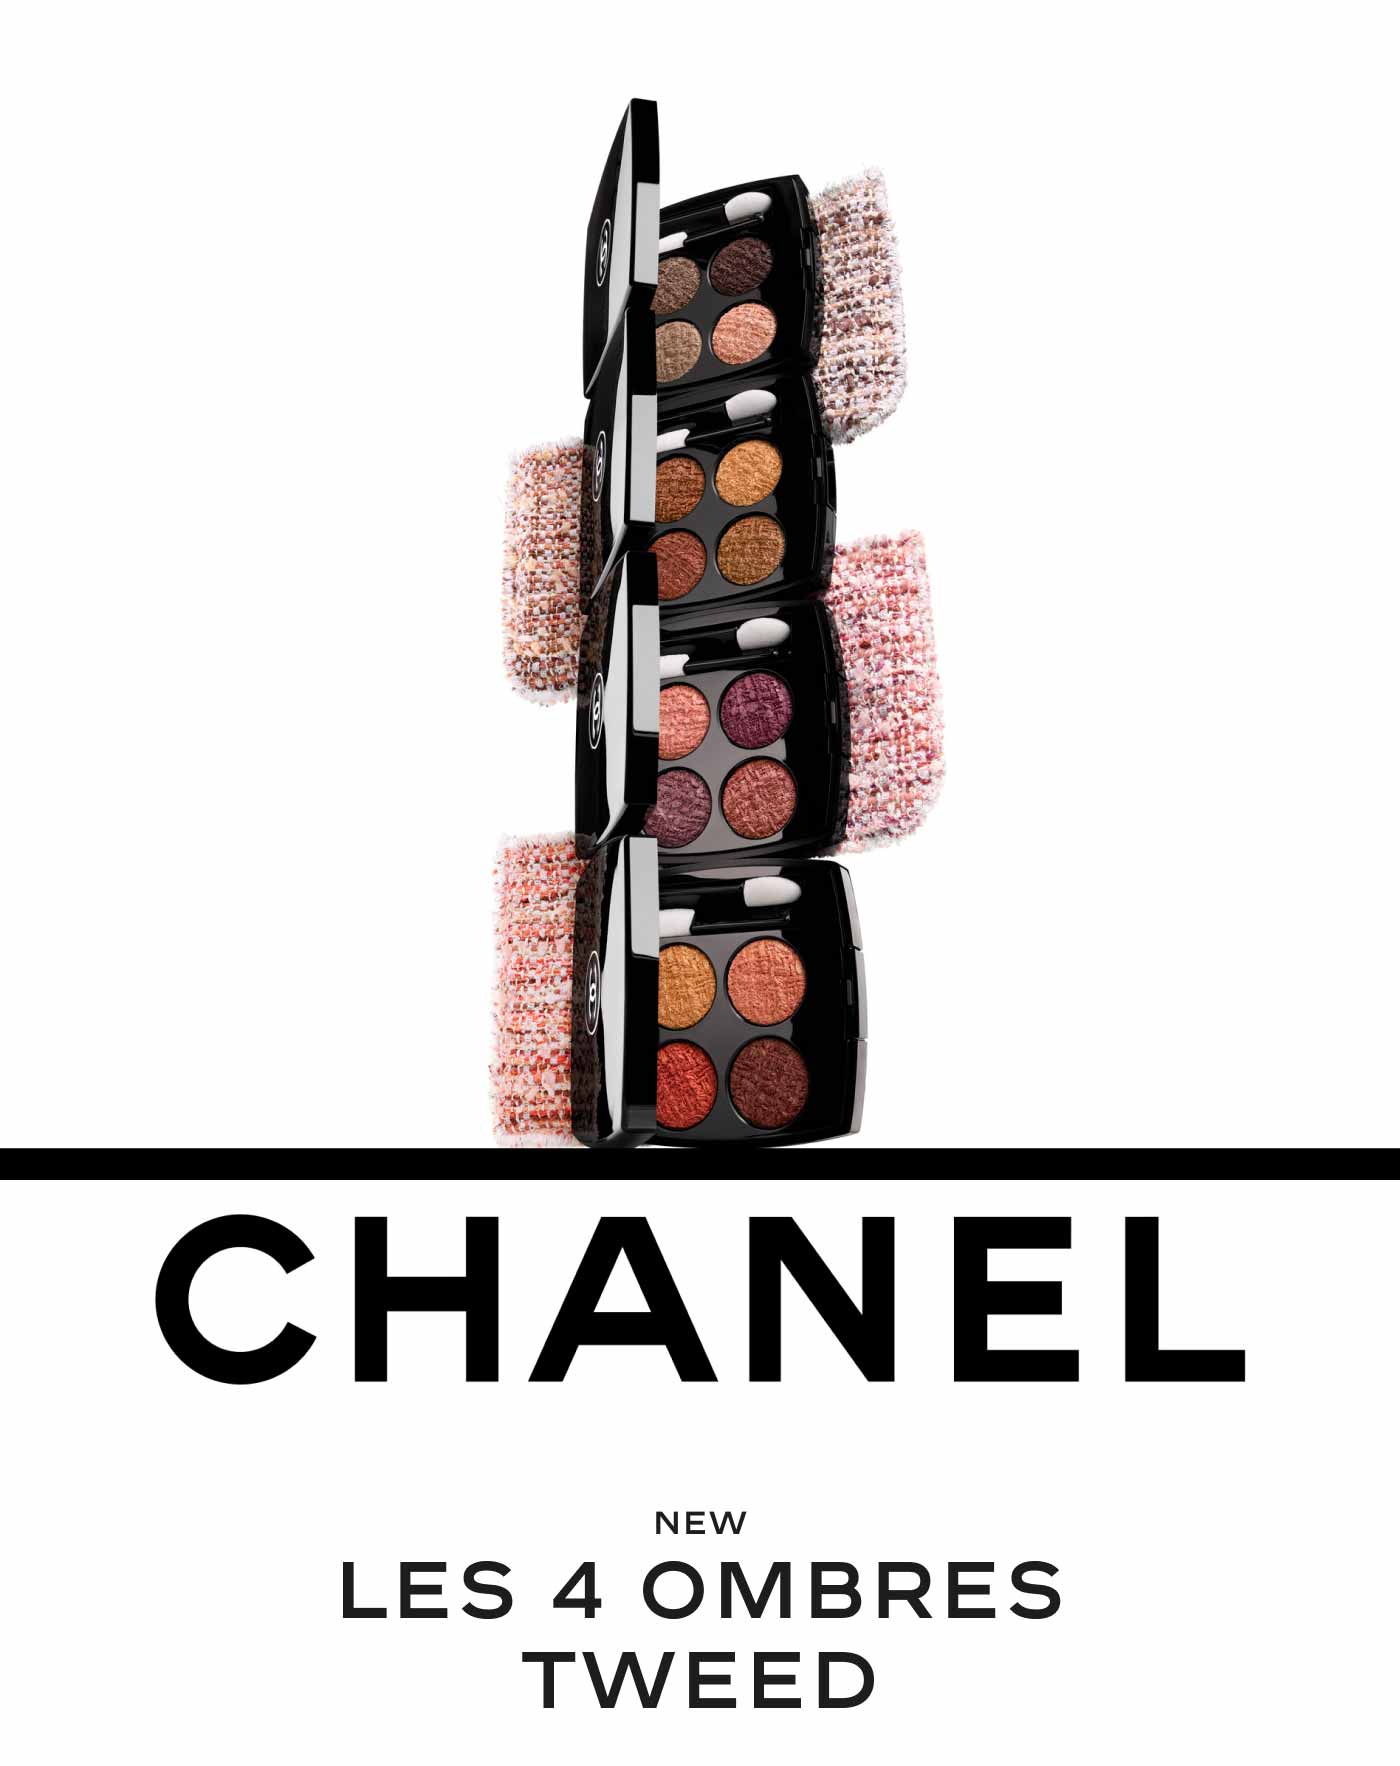 A stack of new Les 4 Ombres Tweed palettes is displayed above the words Chanel: New Les 4 Ombres Tweed